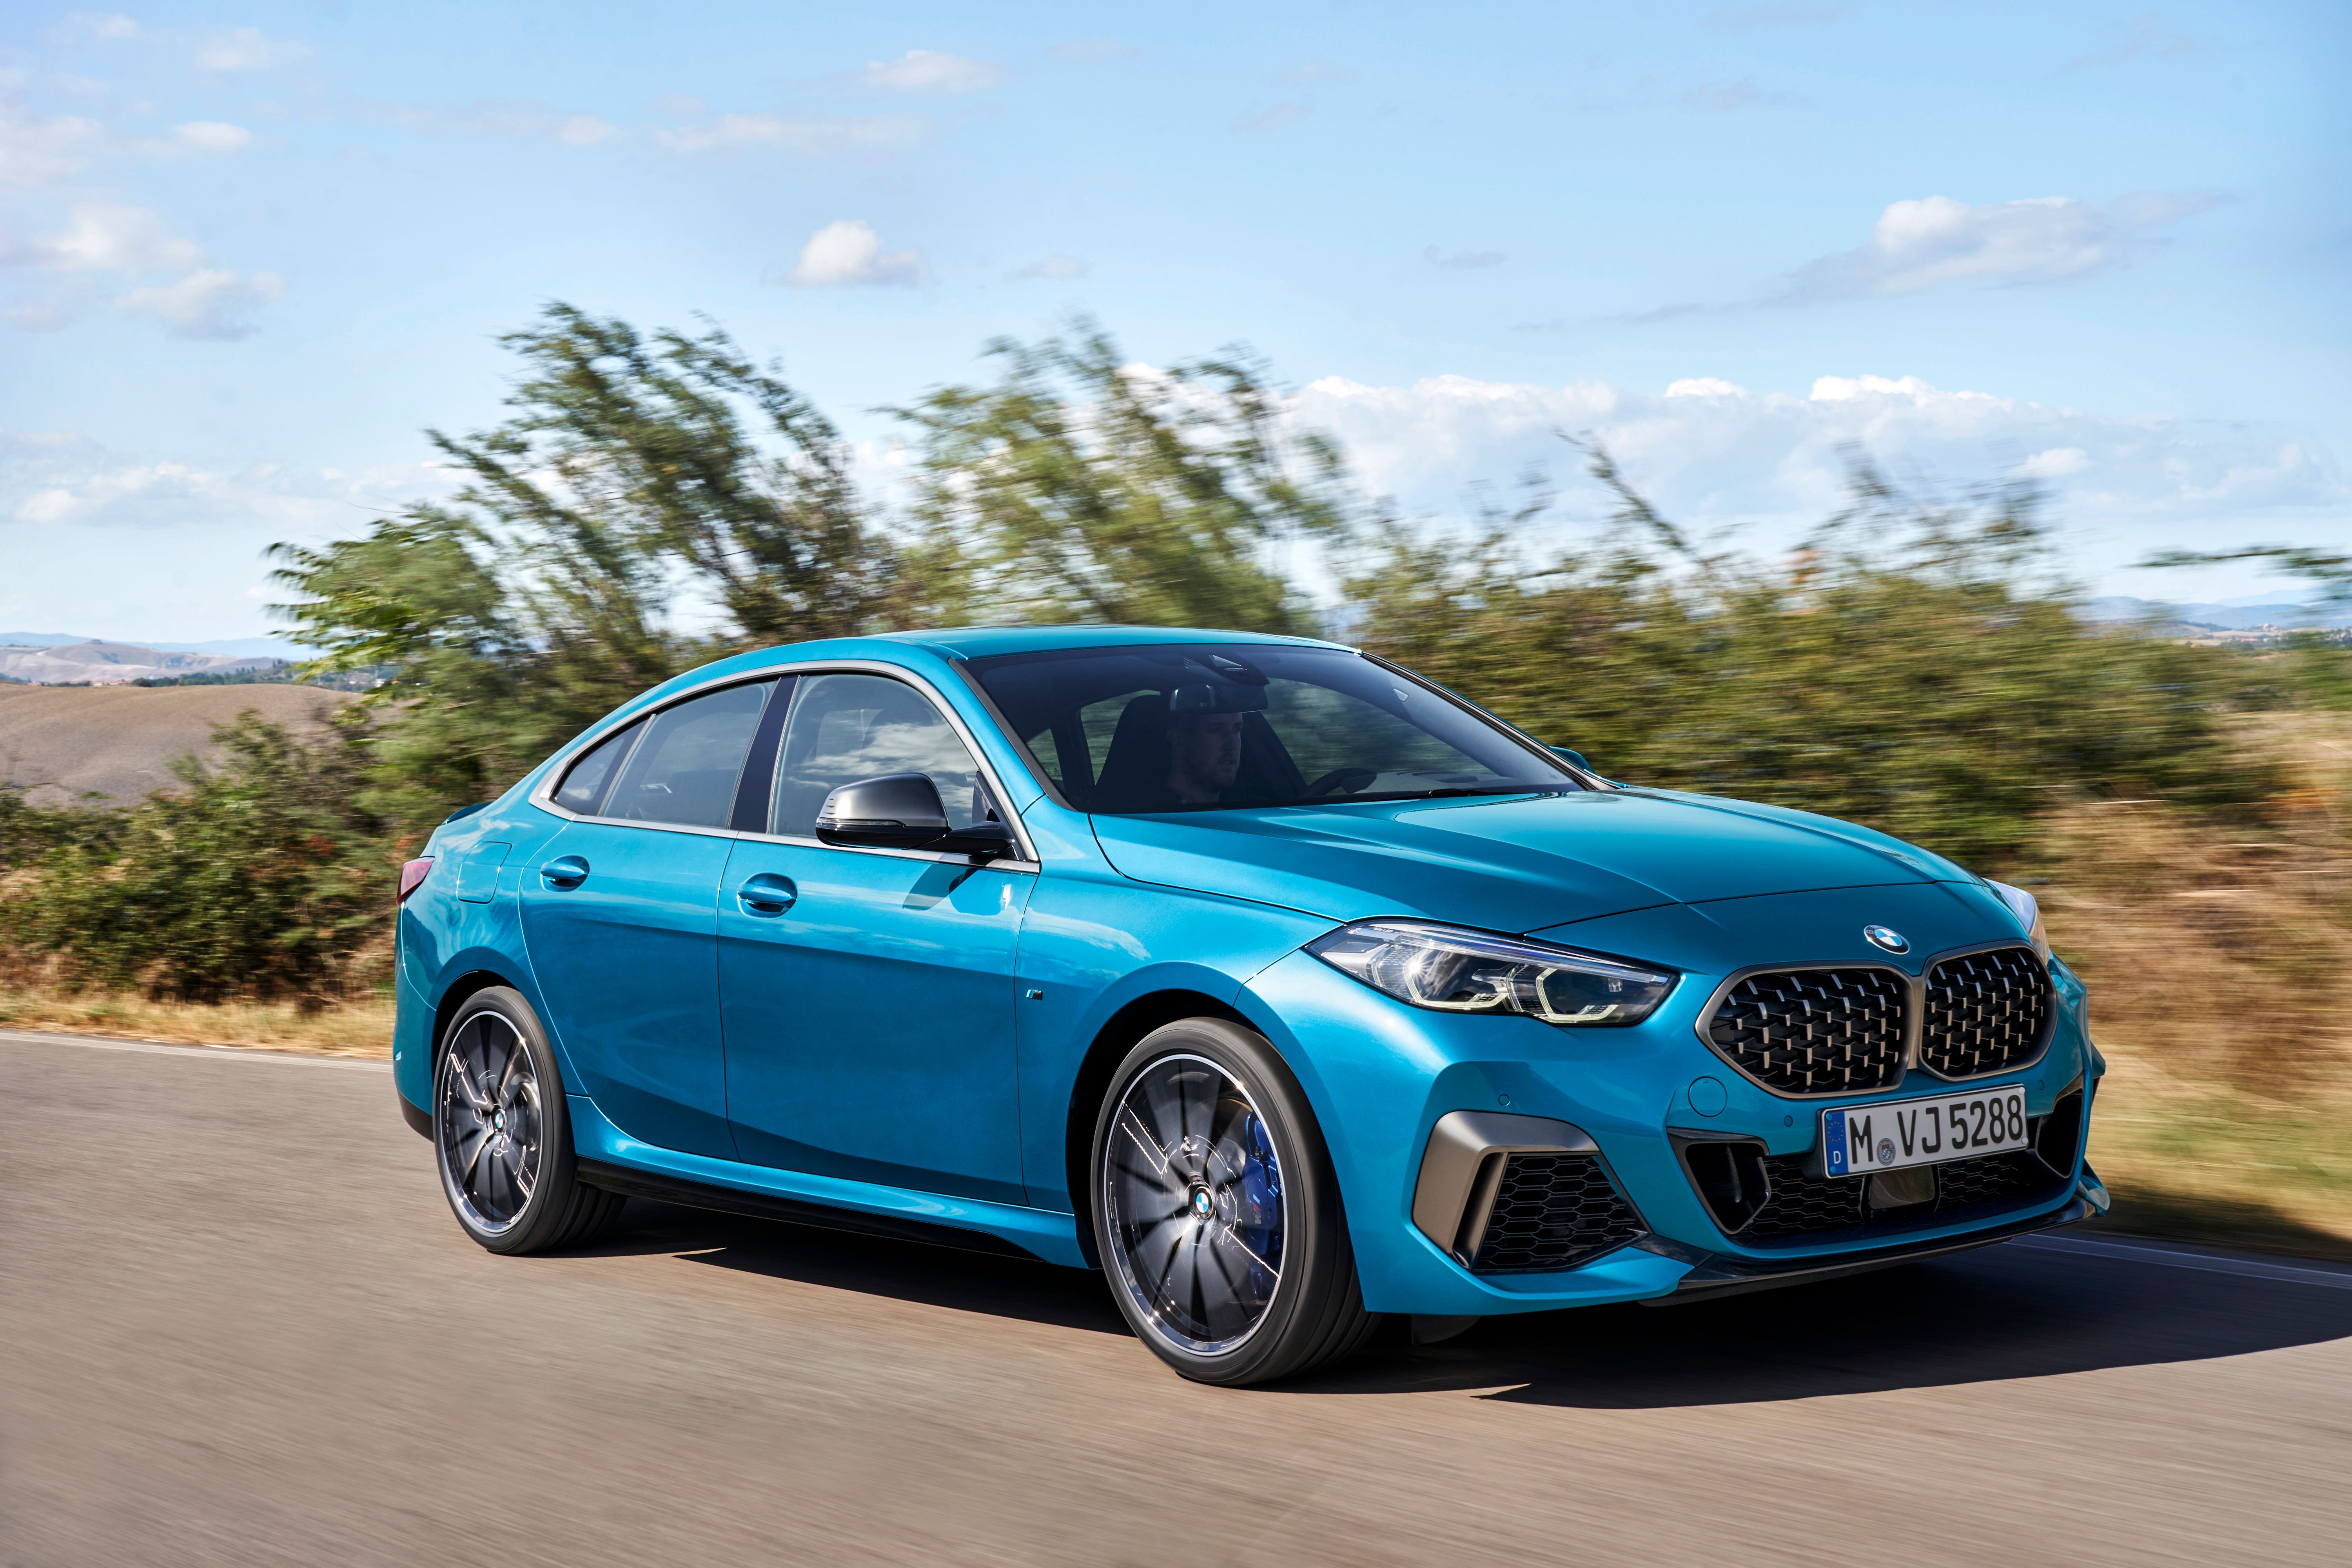 2020 The BMW 2 Series Gran Coupe Arrives With Its Sights Set on the Mercedes CLA-Class and Audi A3